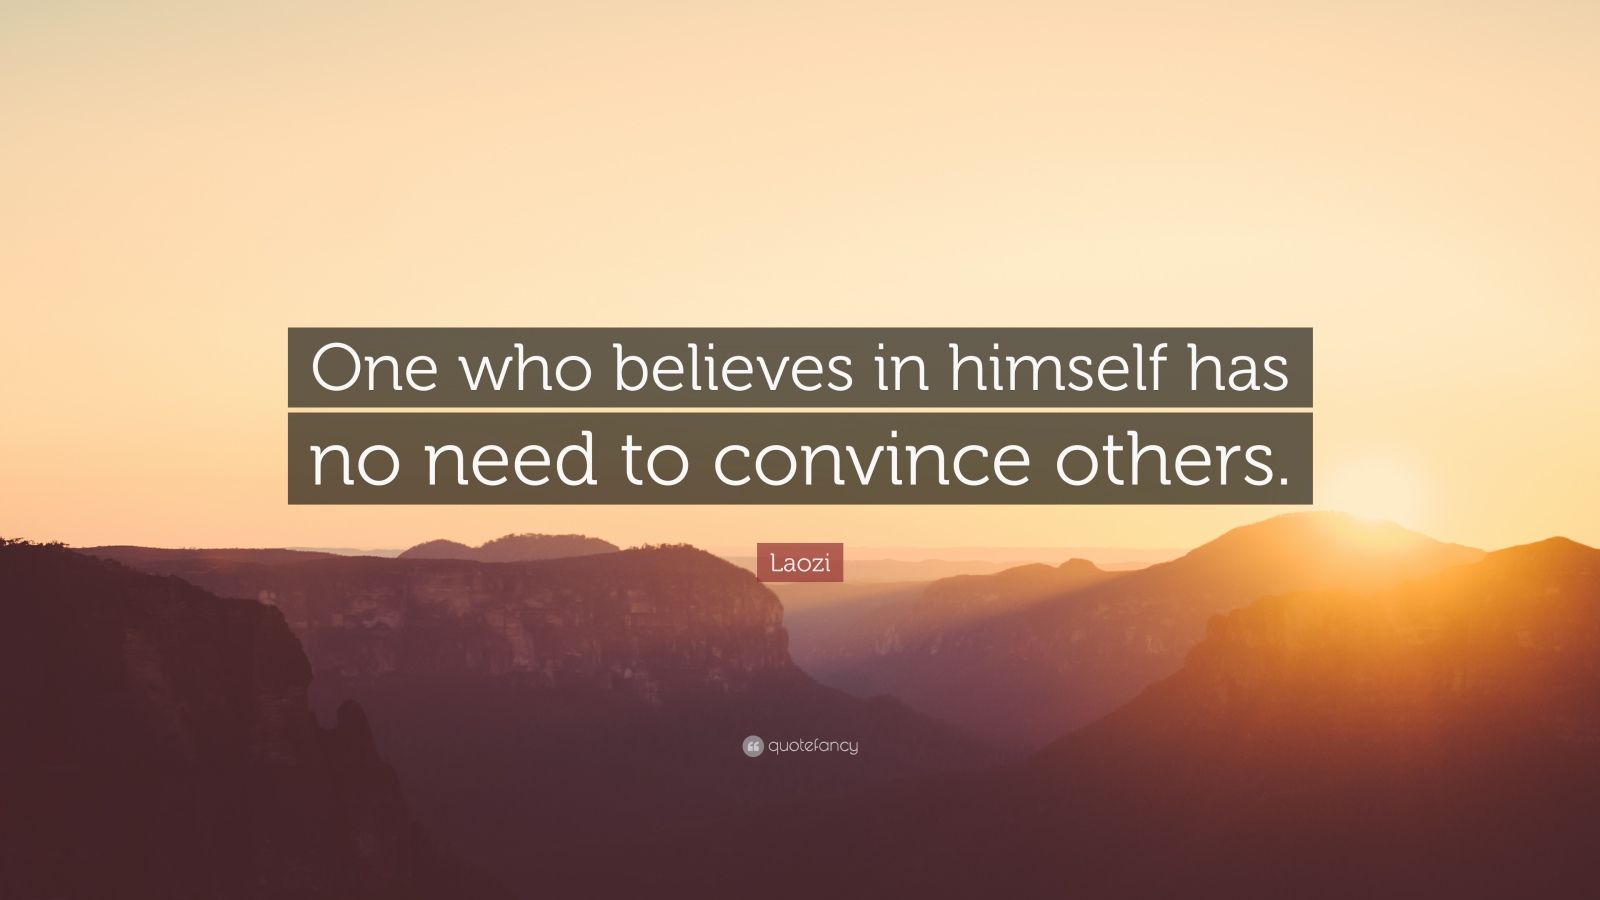 laozi quote: "one who believes in himself has no need to